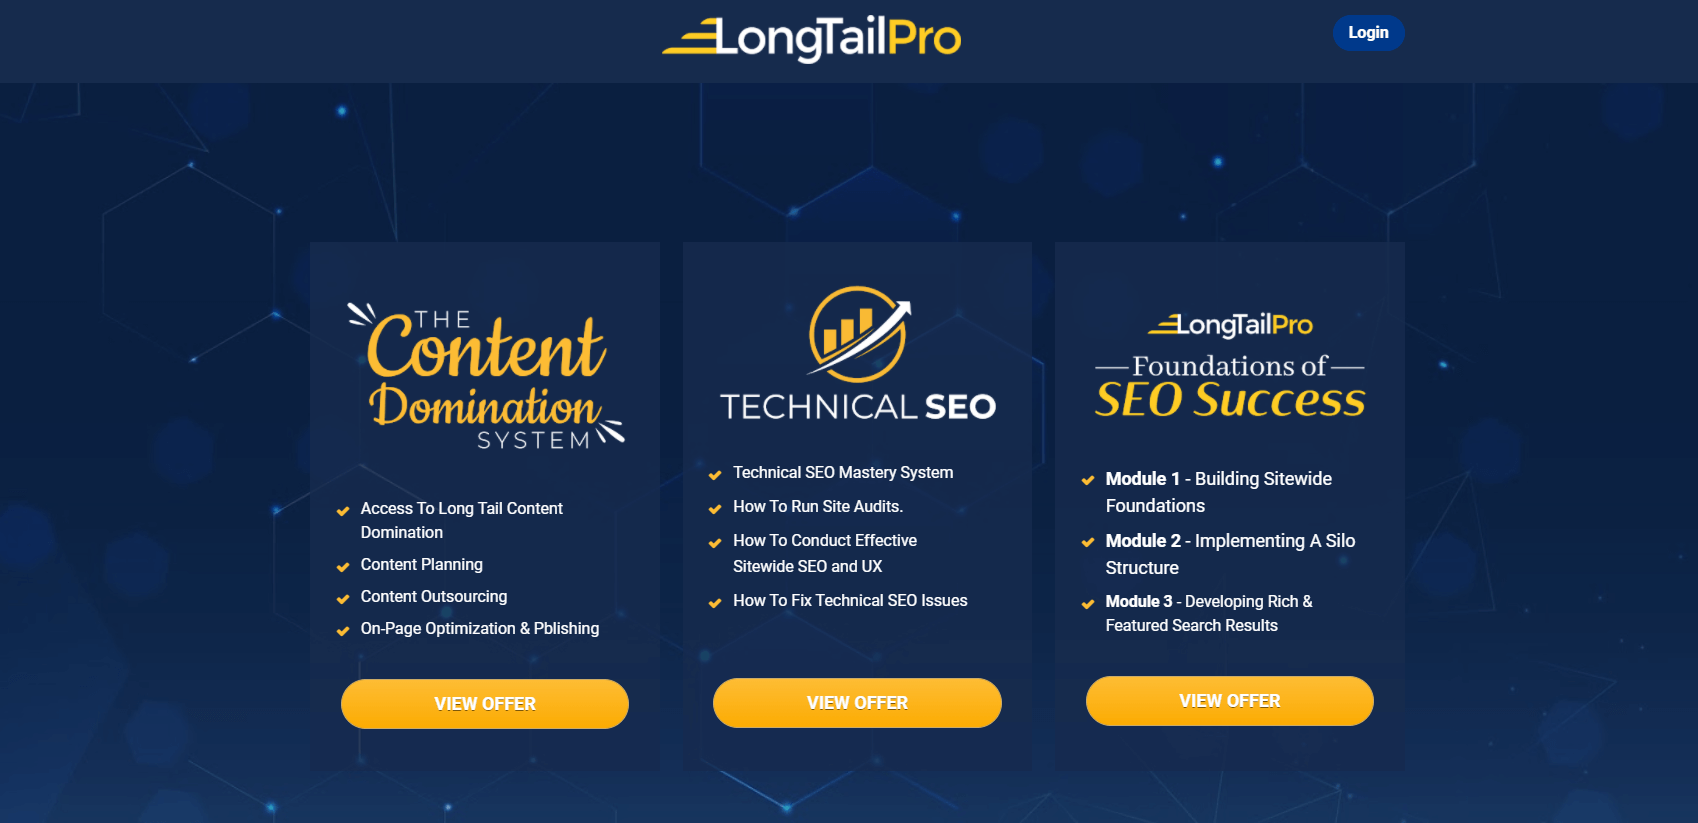 other features long tail pro